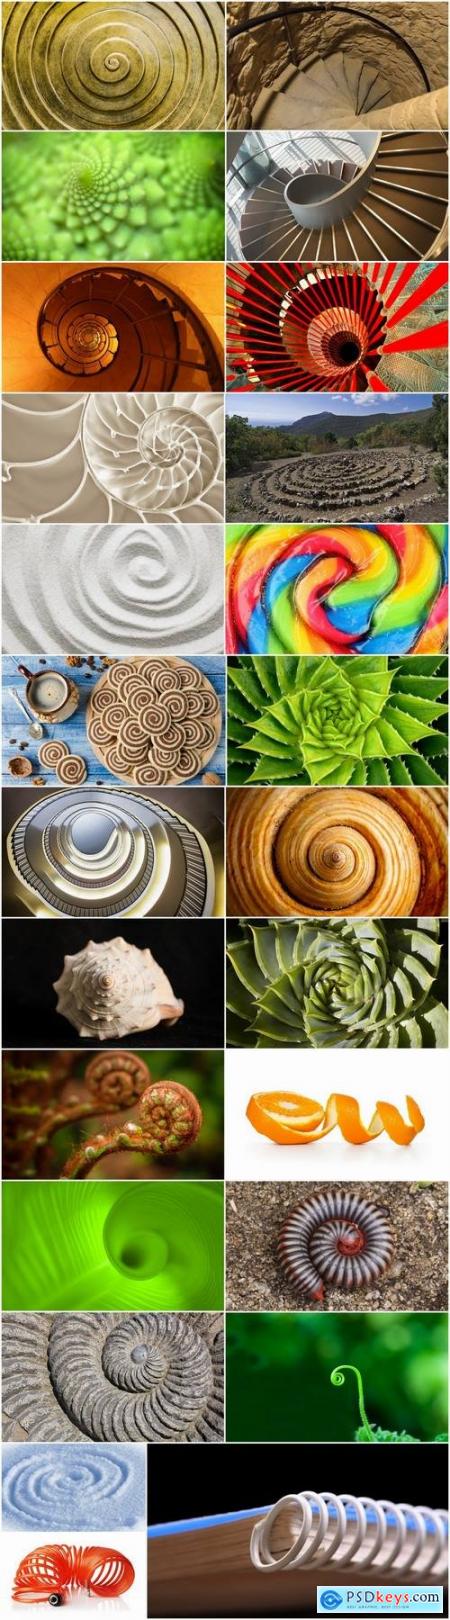 Conceptual illustration spiral staircase shell flower 25 HQ Jpeg